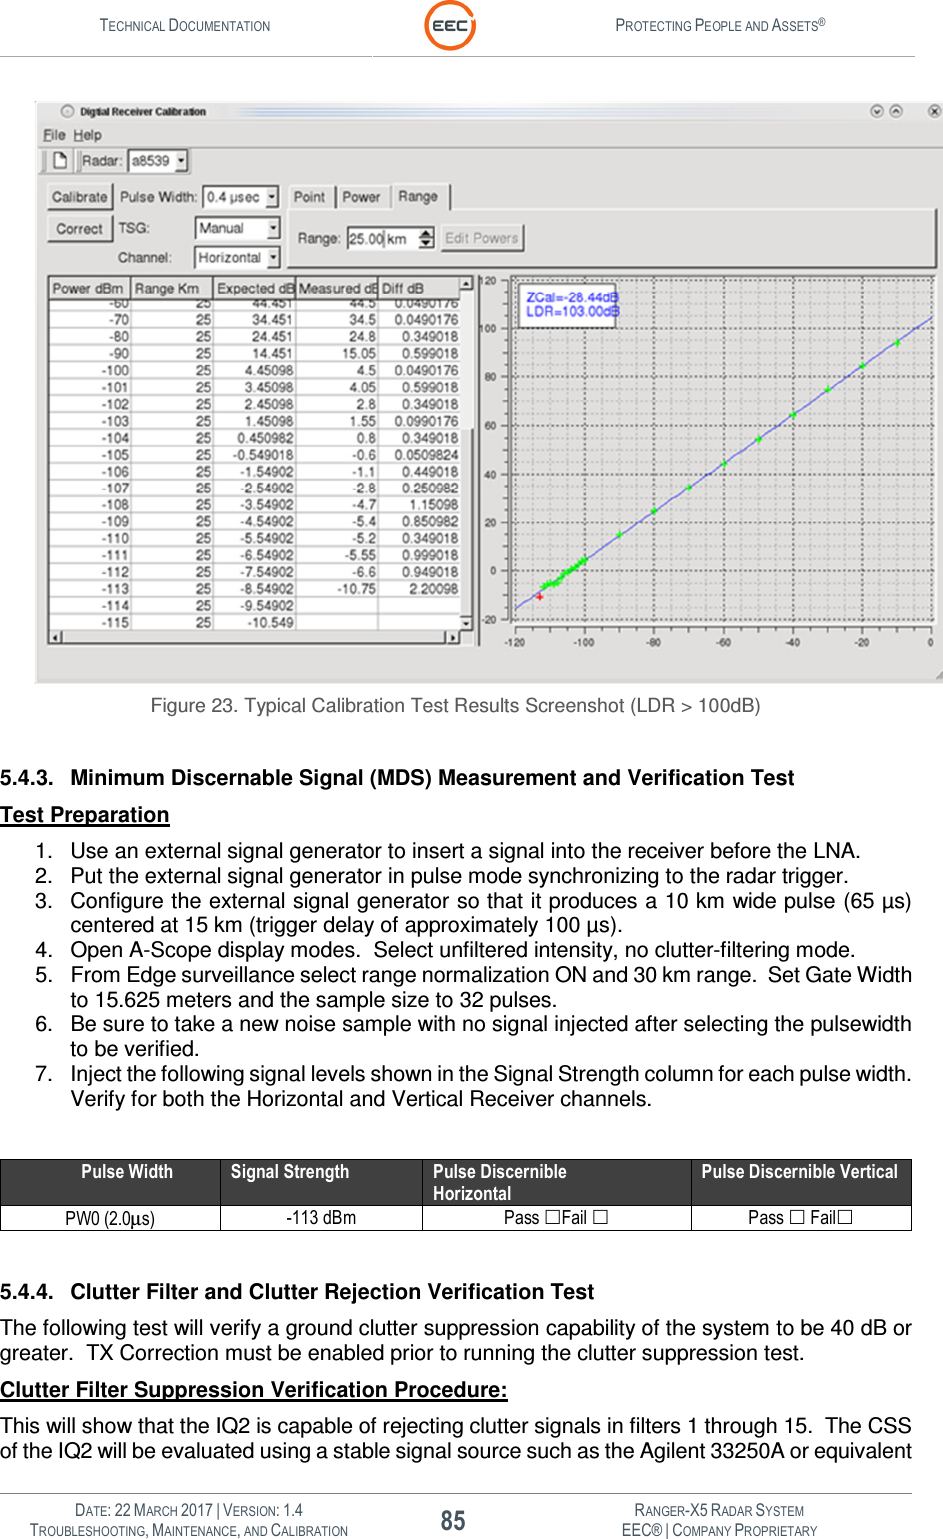 TECHNICAL DOCUMENTATION  PROTECTING PEOPLE AND ASSETS®   DATE: 22 MARCH 2017 | VERSION: 1.4 85 RANGER-X5 RADAR SYSTEM TROUBLESHOOTING, MAINTENANCE, AND CALIBRATION EEC® | COMPANY PROPRIETARY   Figure 23. Typical Calibration Test Results Screenshot (LDR &gt; 100dB)  5.4.3.  Minimum Discernable Signal (MDS) Measurement and Verification Test Test Preparation 1.  Use an external signal generator to insert a signal into the receiver before the LNA. 2.  Put the external signal generator in pulse mode synchronizing to the radar trigger. 3.  Configure the external signal generator so that it produces a 10 km wide pulse (65 µs) centered at 15 km (trigger delay of approximately 100 µs). 4.  Open A-Scope display modes.  Select unfiltered intensity, no clutter-filtering mode. 5.  From Edge surveillance select range normalization ON and 30 km range.  Set Gate Width to 15.625 meters and the sample size to 32 pulses. 6.  Be sure to take a new noise sample with no signal injected after selecting the pulsewidth to be verified. 7.  Inject the following signal levels shown in the Signal Strength column for each pulse width. Verify for both the Horizontal and Vertical Receiver channels.   Pulse Width Signal Strength Pulse Discernible Horizontal Pulse Discernible Vertical PW0 (2.0µs) -113 dBm Pass Fail  Pass  Fail  5.4.4.  Clutter Filter and Clutter Rejection Verification Test The following test will verify a ground clutter suppression capability of the system to be 40 dB or greater.  TX Correction must be enabled prior to running the clutter suppression test. Clutter Filter Suppression Verification Procedure: This will show that the IQ2 is capable of rejecting clutter signals in filters 1 through 15.  The CSS of the IQ2 will be evaluated using a stable signal source such as the Agilent 33250A or equivalent 